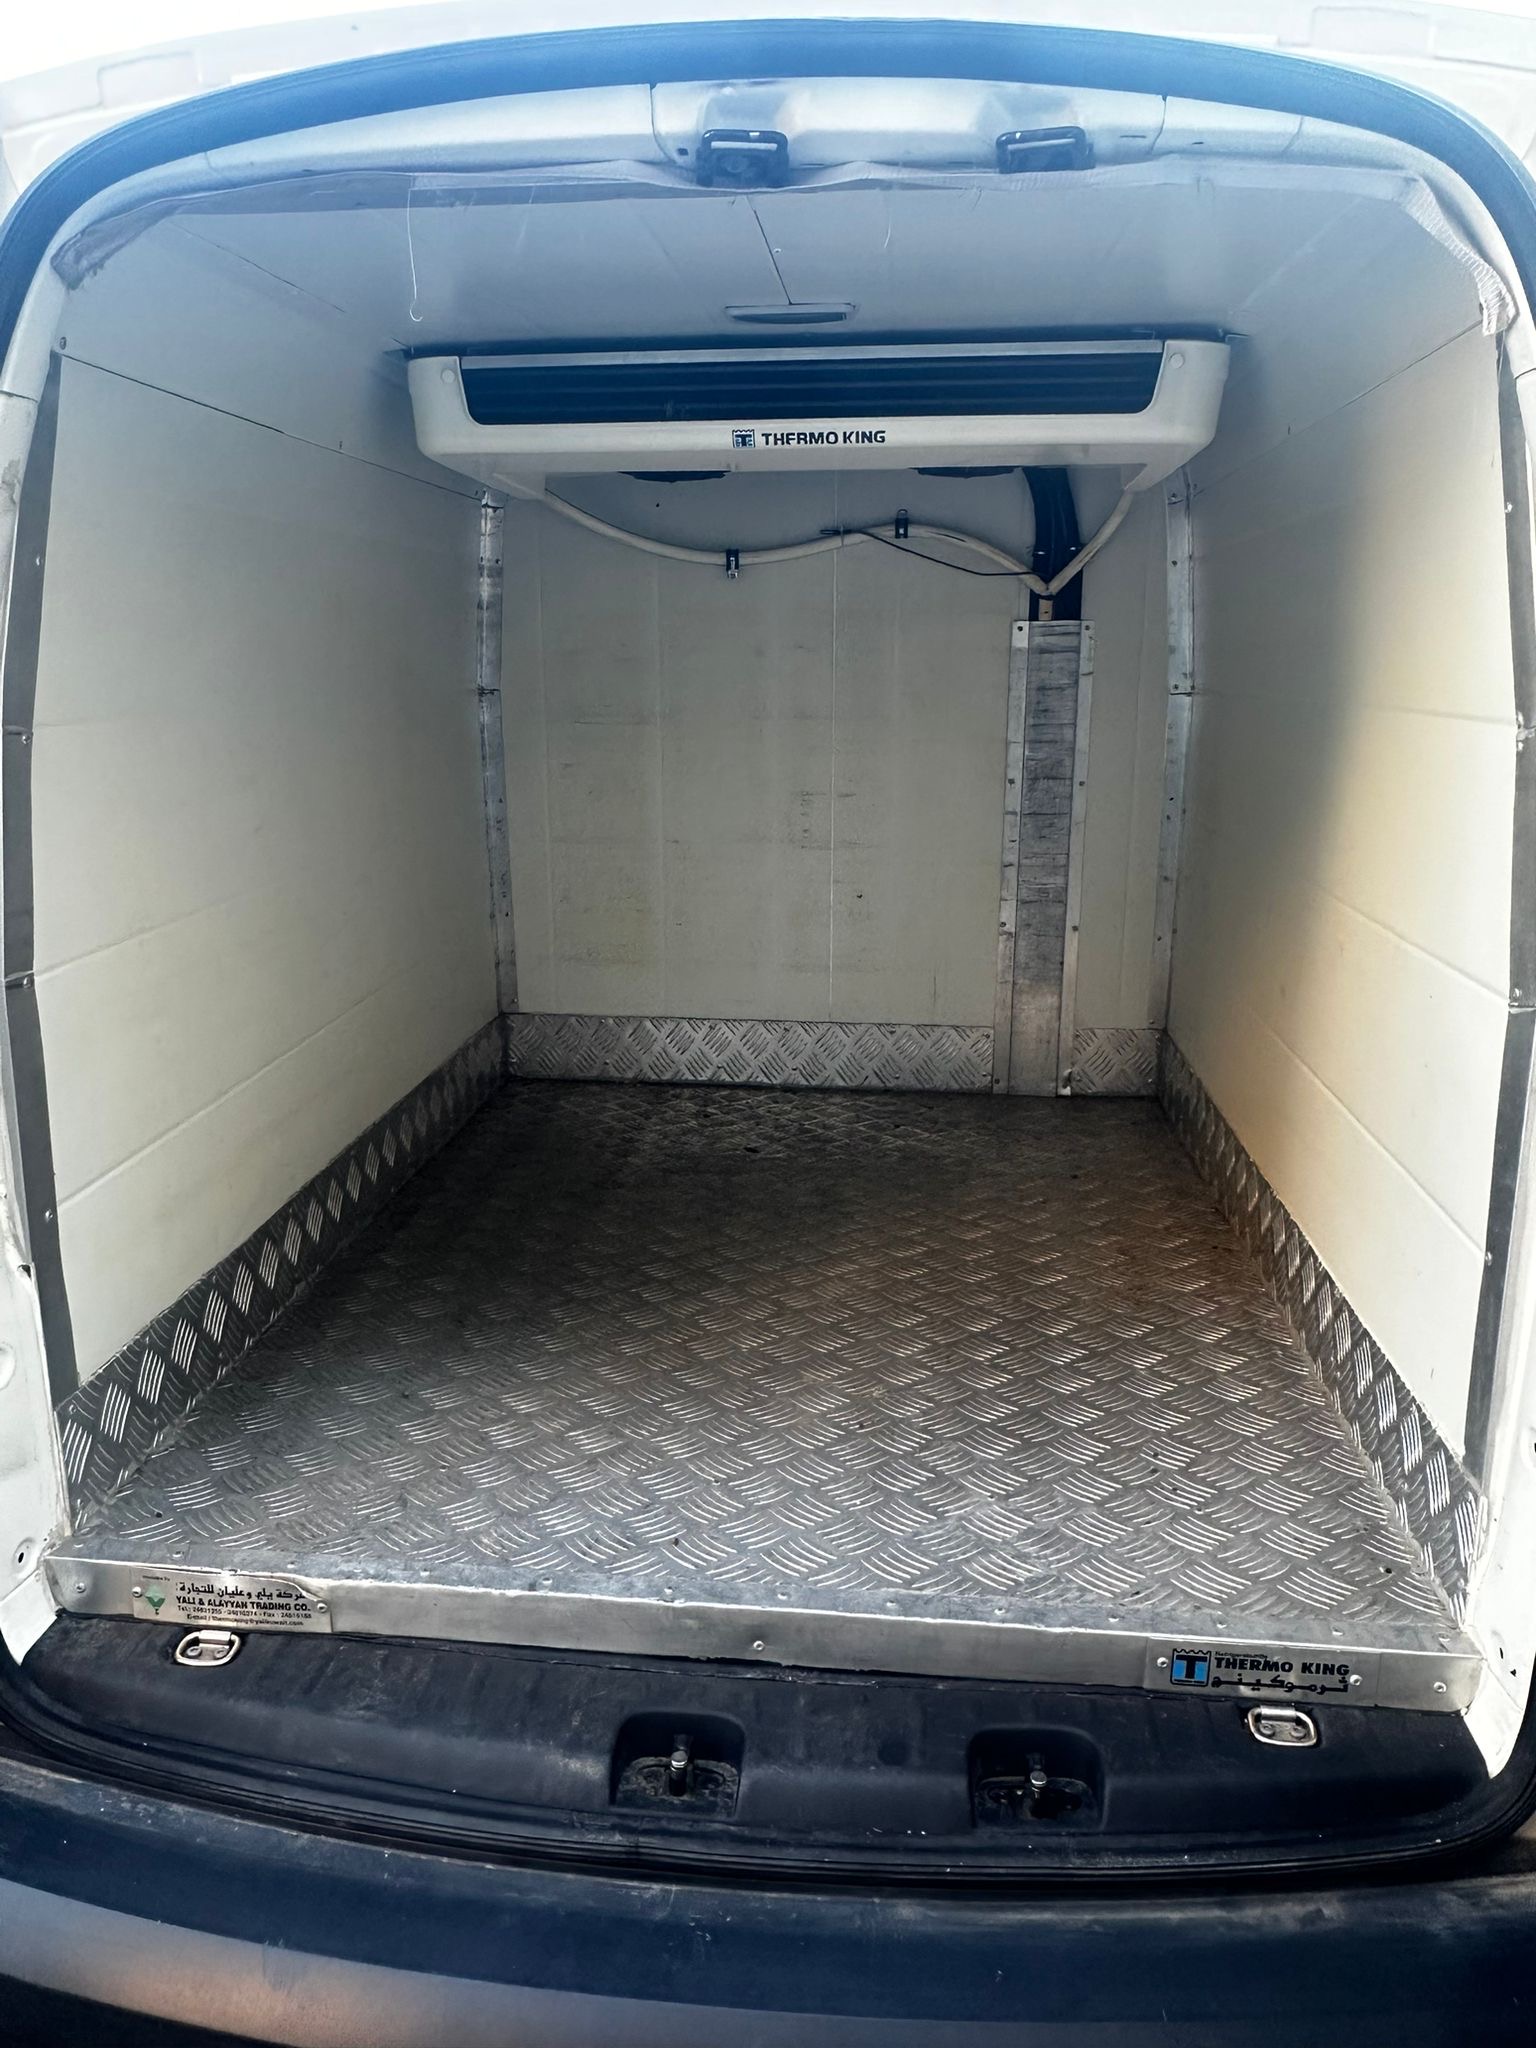 Volkswagen caddy box with thermoking cooler 